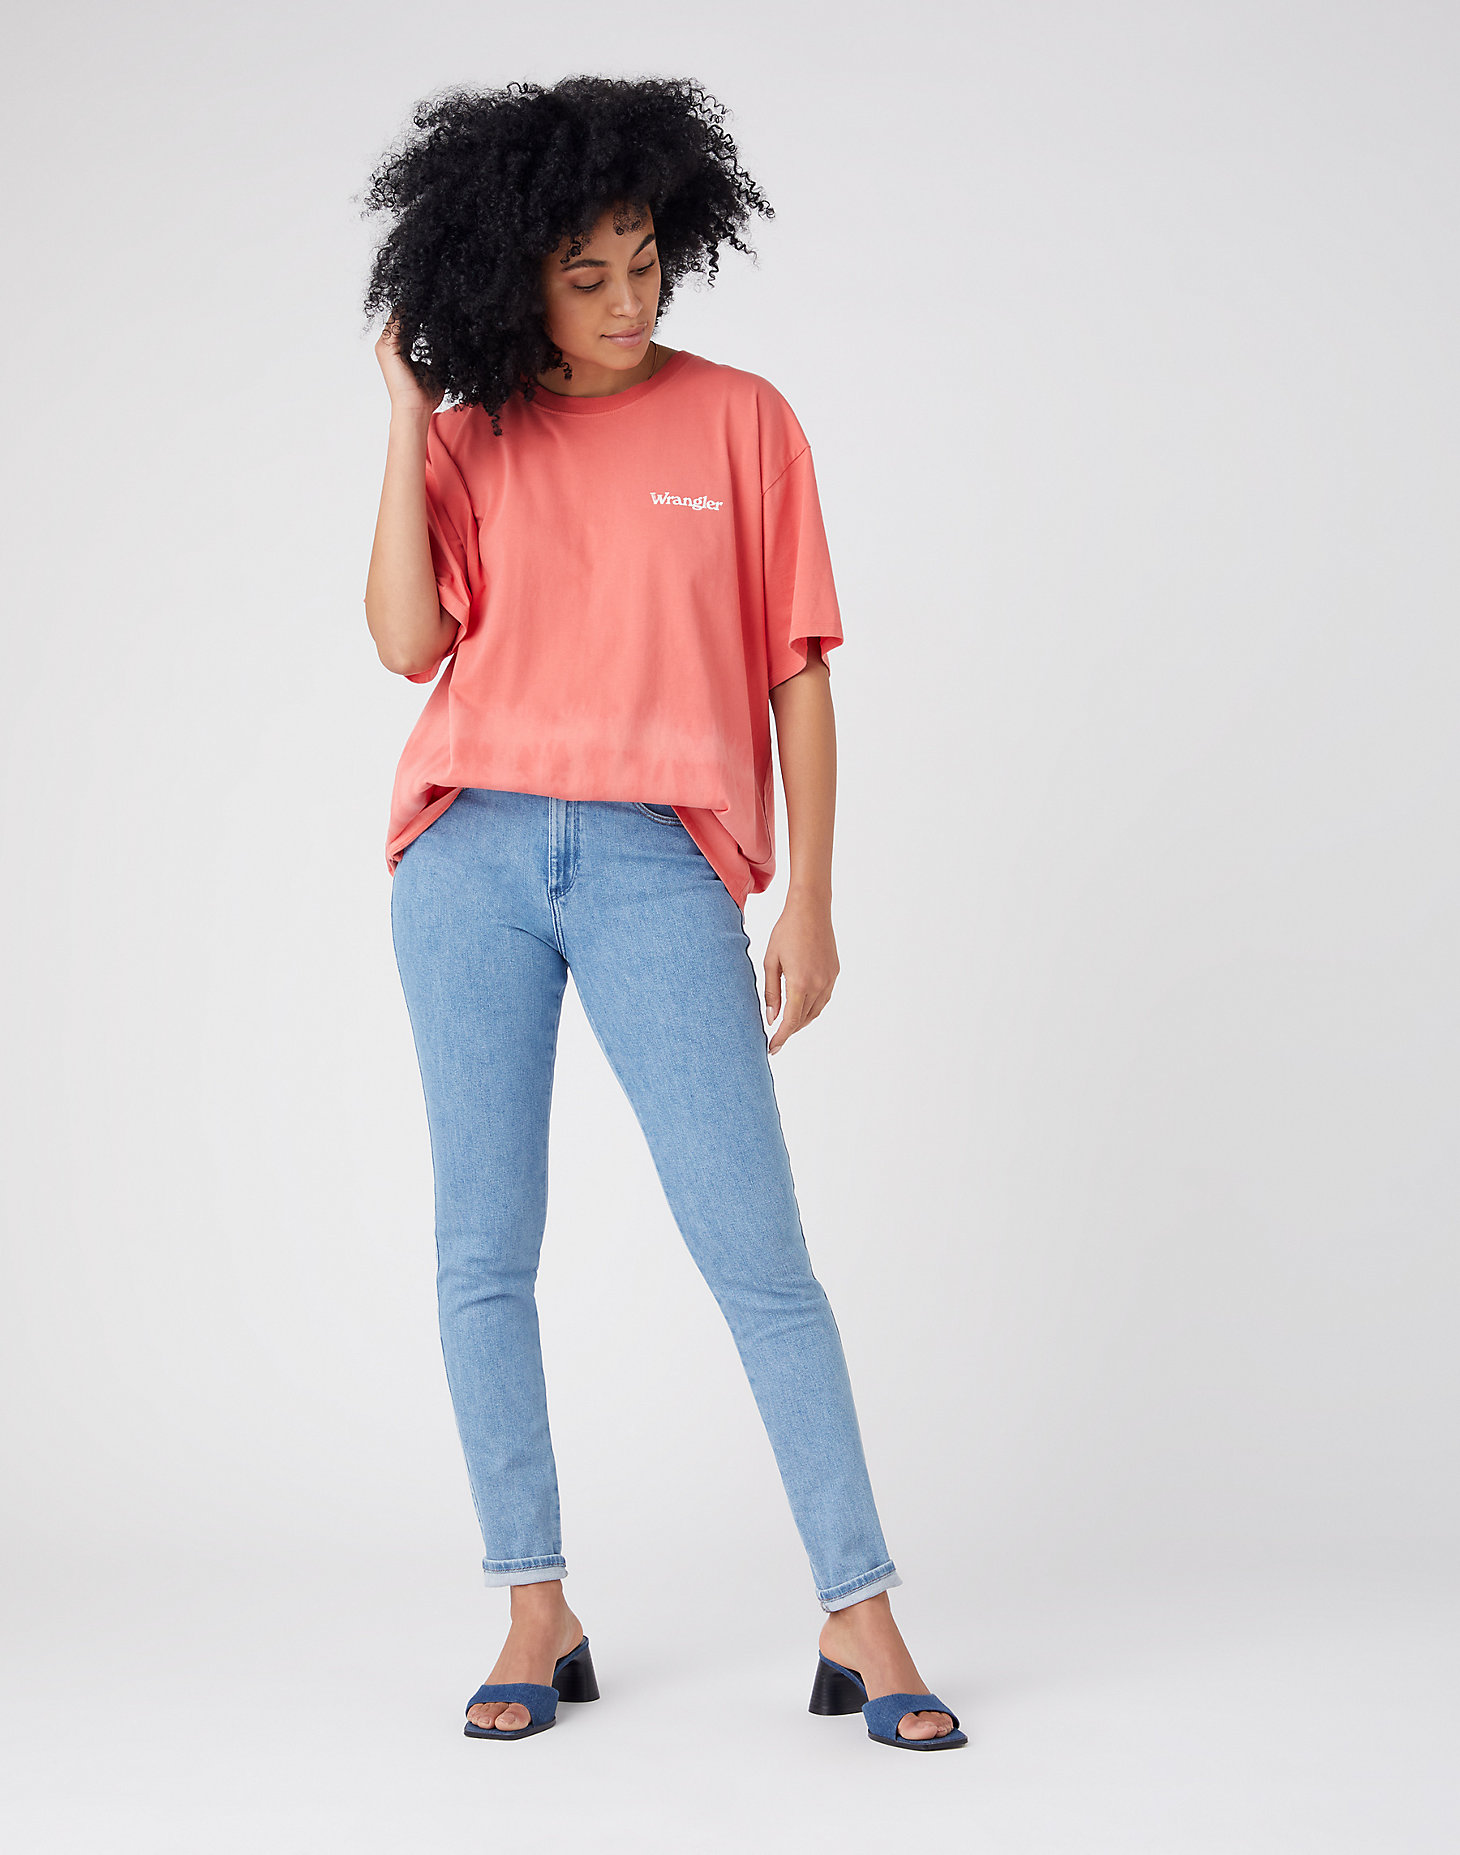 Oversized Tee in Spiced Coral alternative view 1